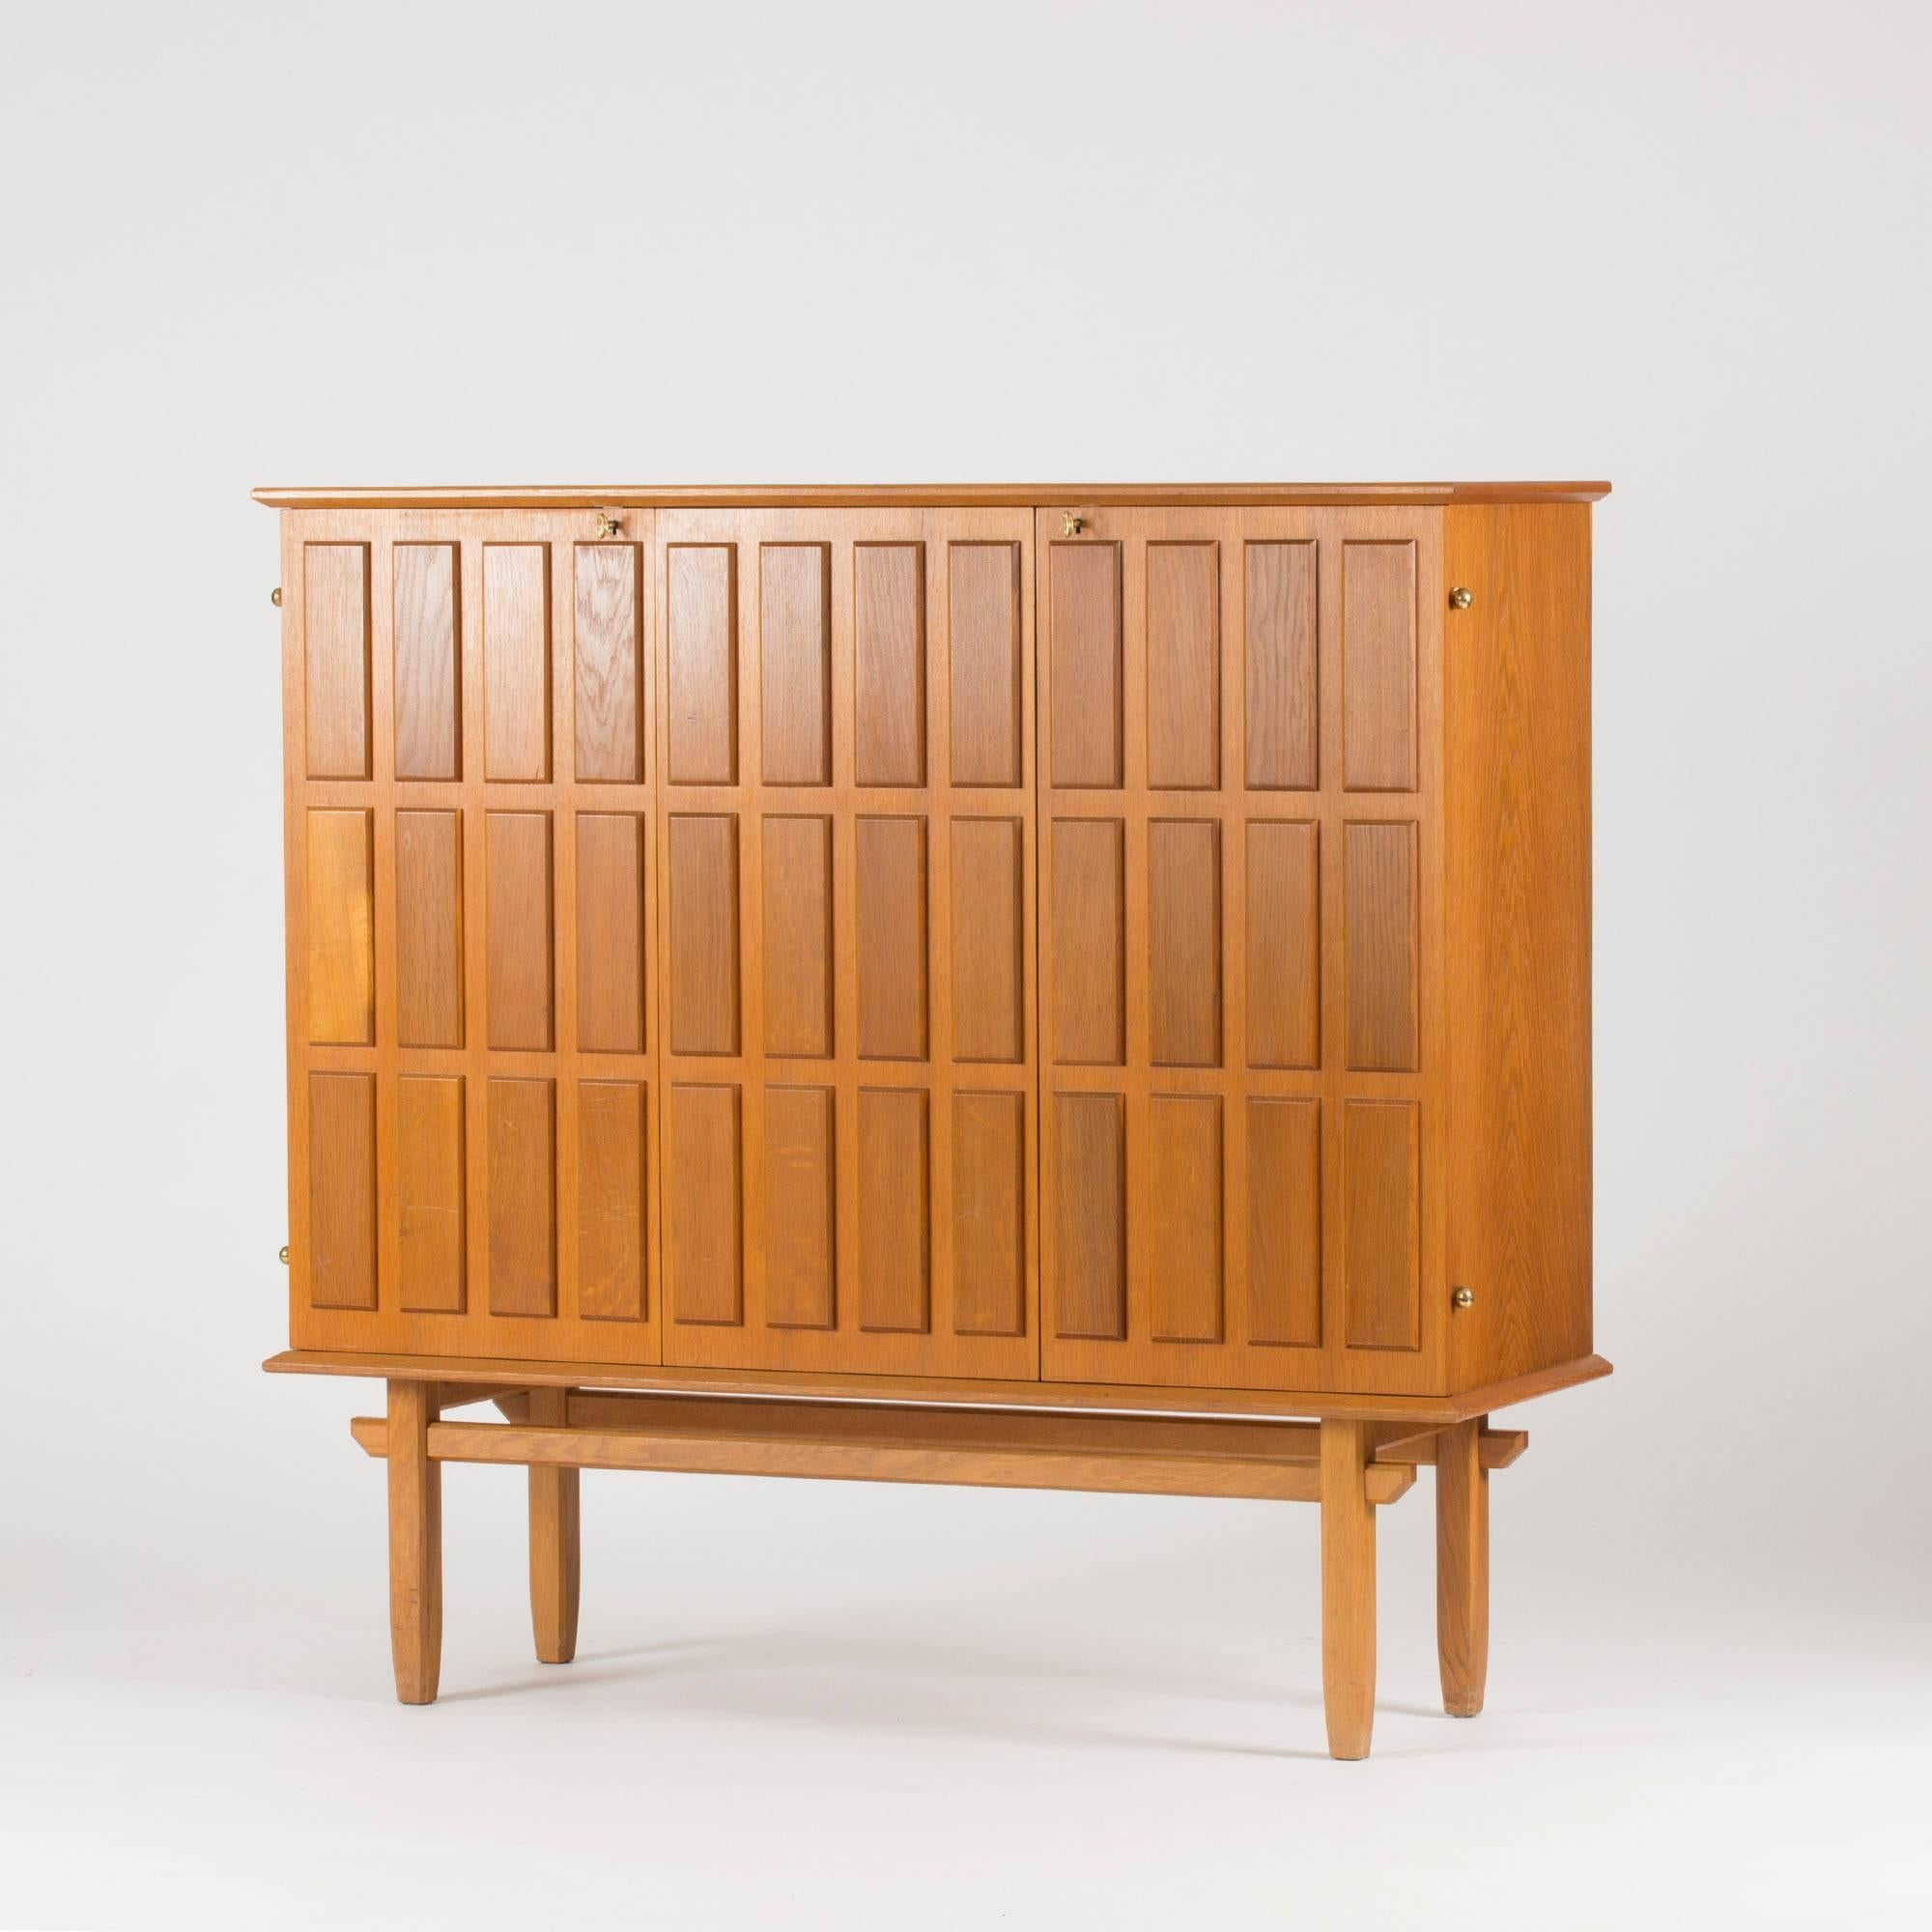 Mahogany cabinet by Eyvind Beckman with a striking, deep relief pattern of large rectangles. Subtle, elegant details, protruding brass hinges.